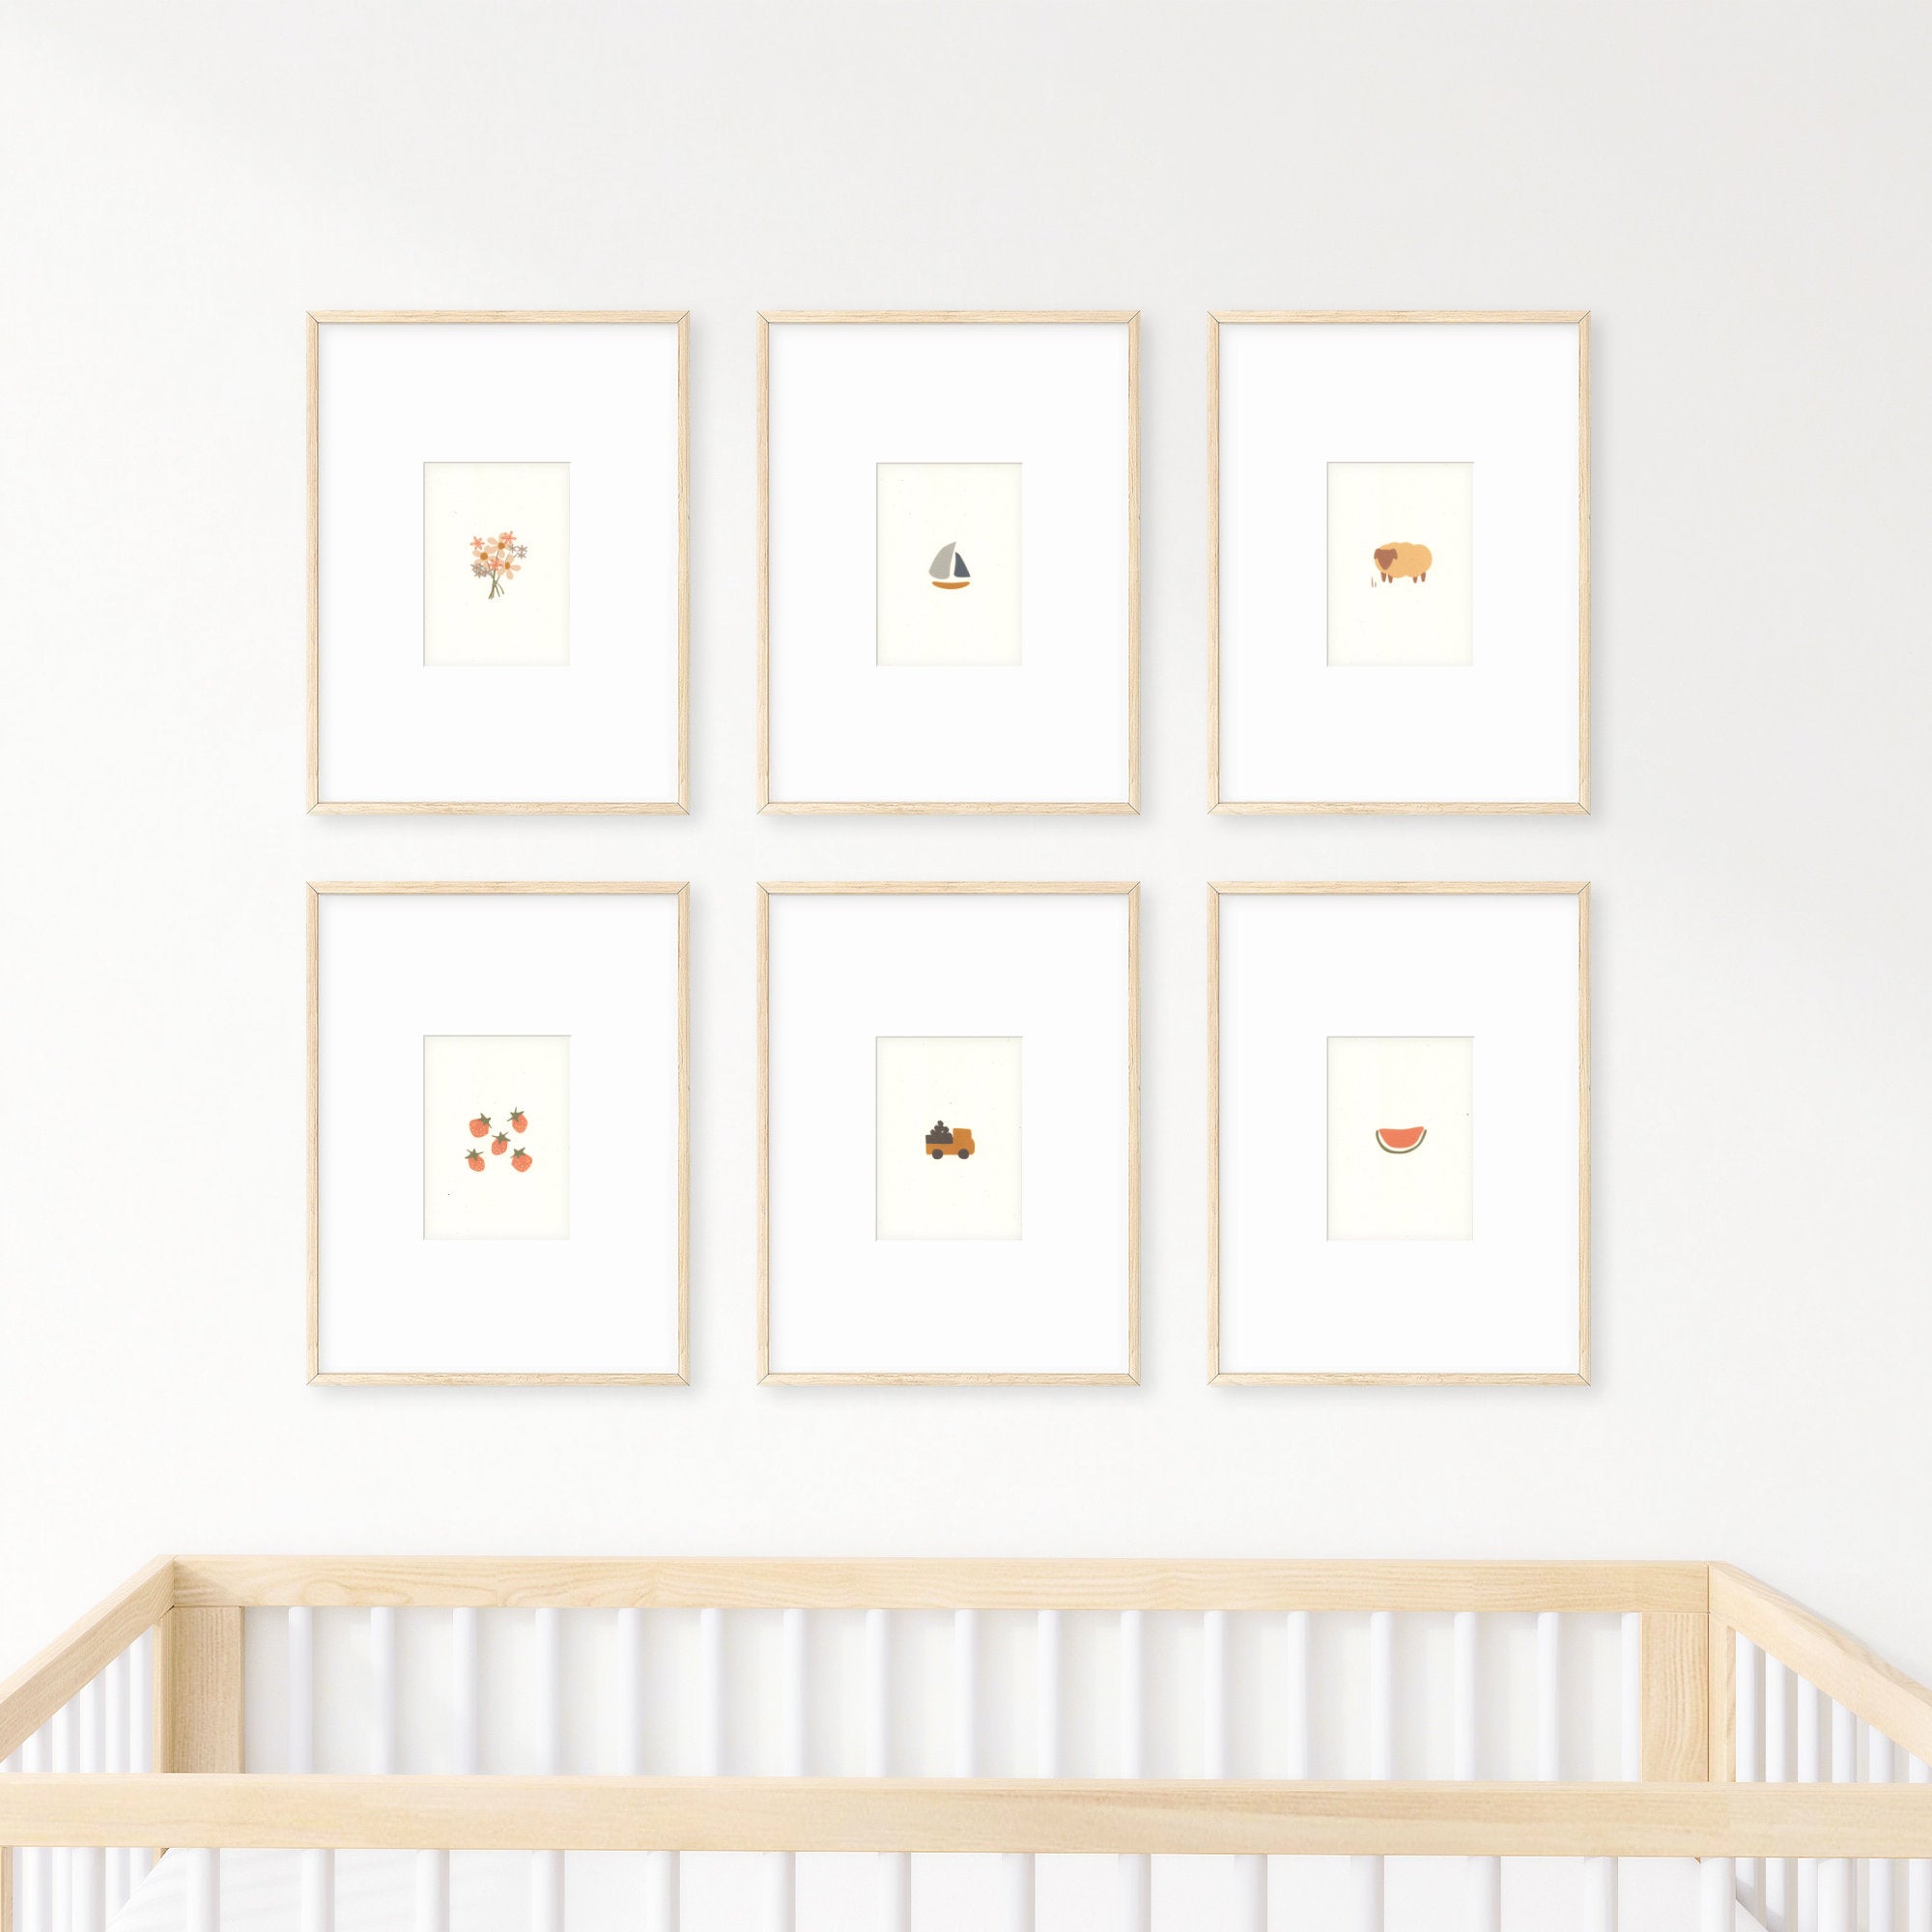 Six cute nursery prints framed and hanging on a wall over a baby's crib. The prints show: a bouquet of flowers, a small sailboat, a brown sheep, five strawberries, a small dump truck carrying boulders, and a slice of watermelon.